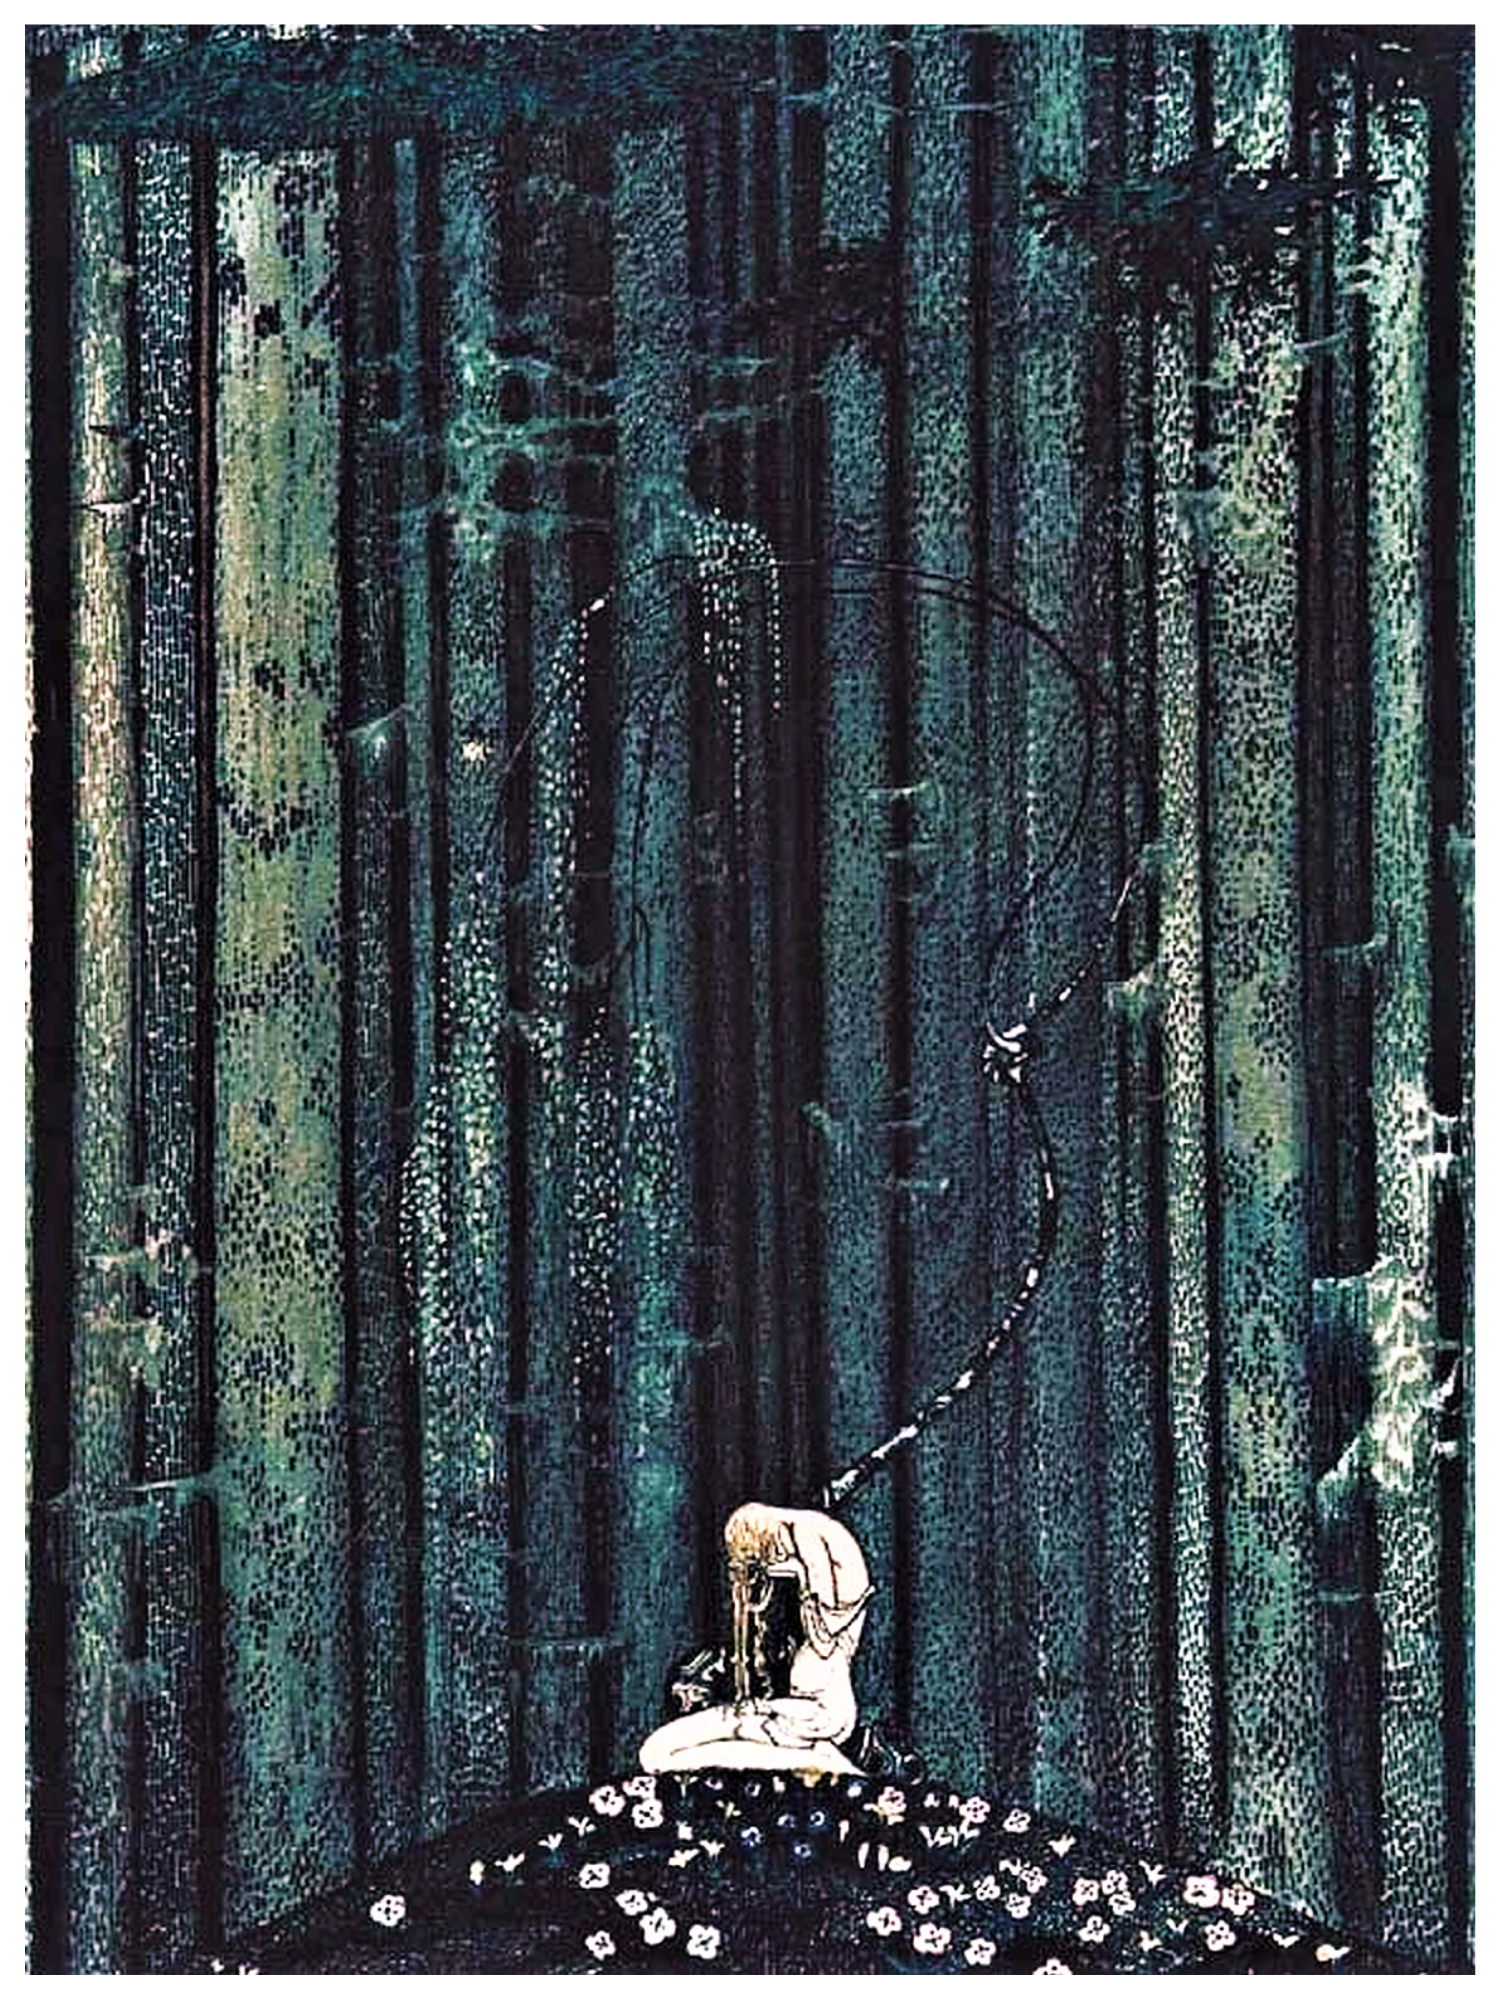 Fairytale & Folklore Poster - Kay Nielsen, East of the Sun West of the Moon, Gloomy Wood, 12X16